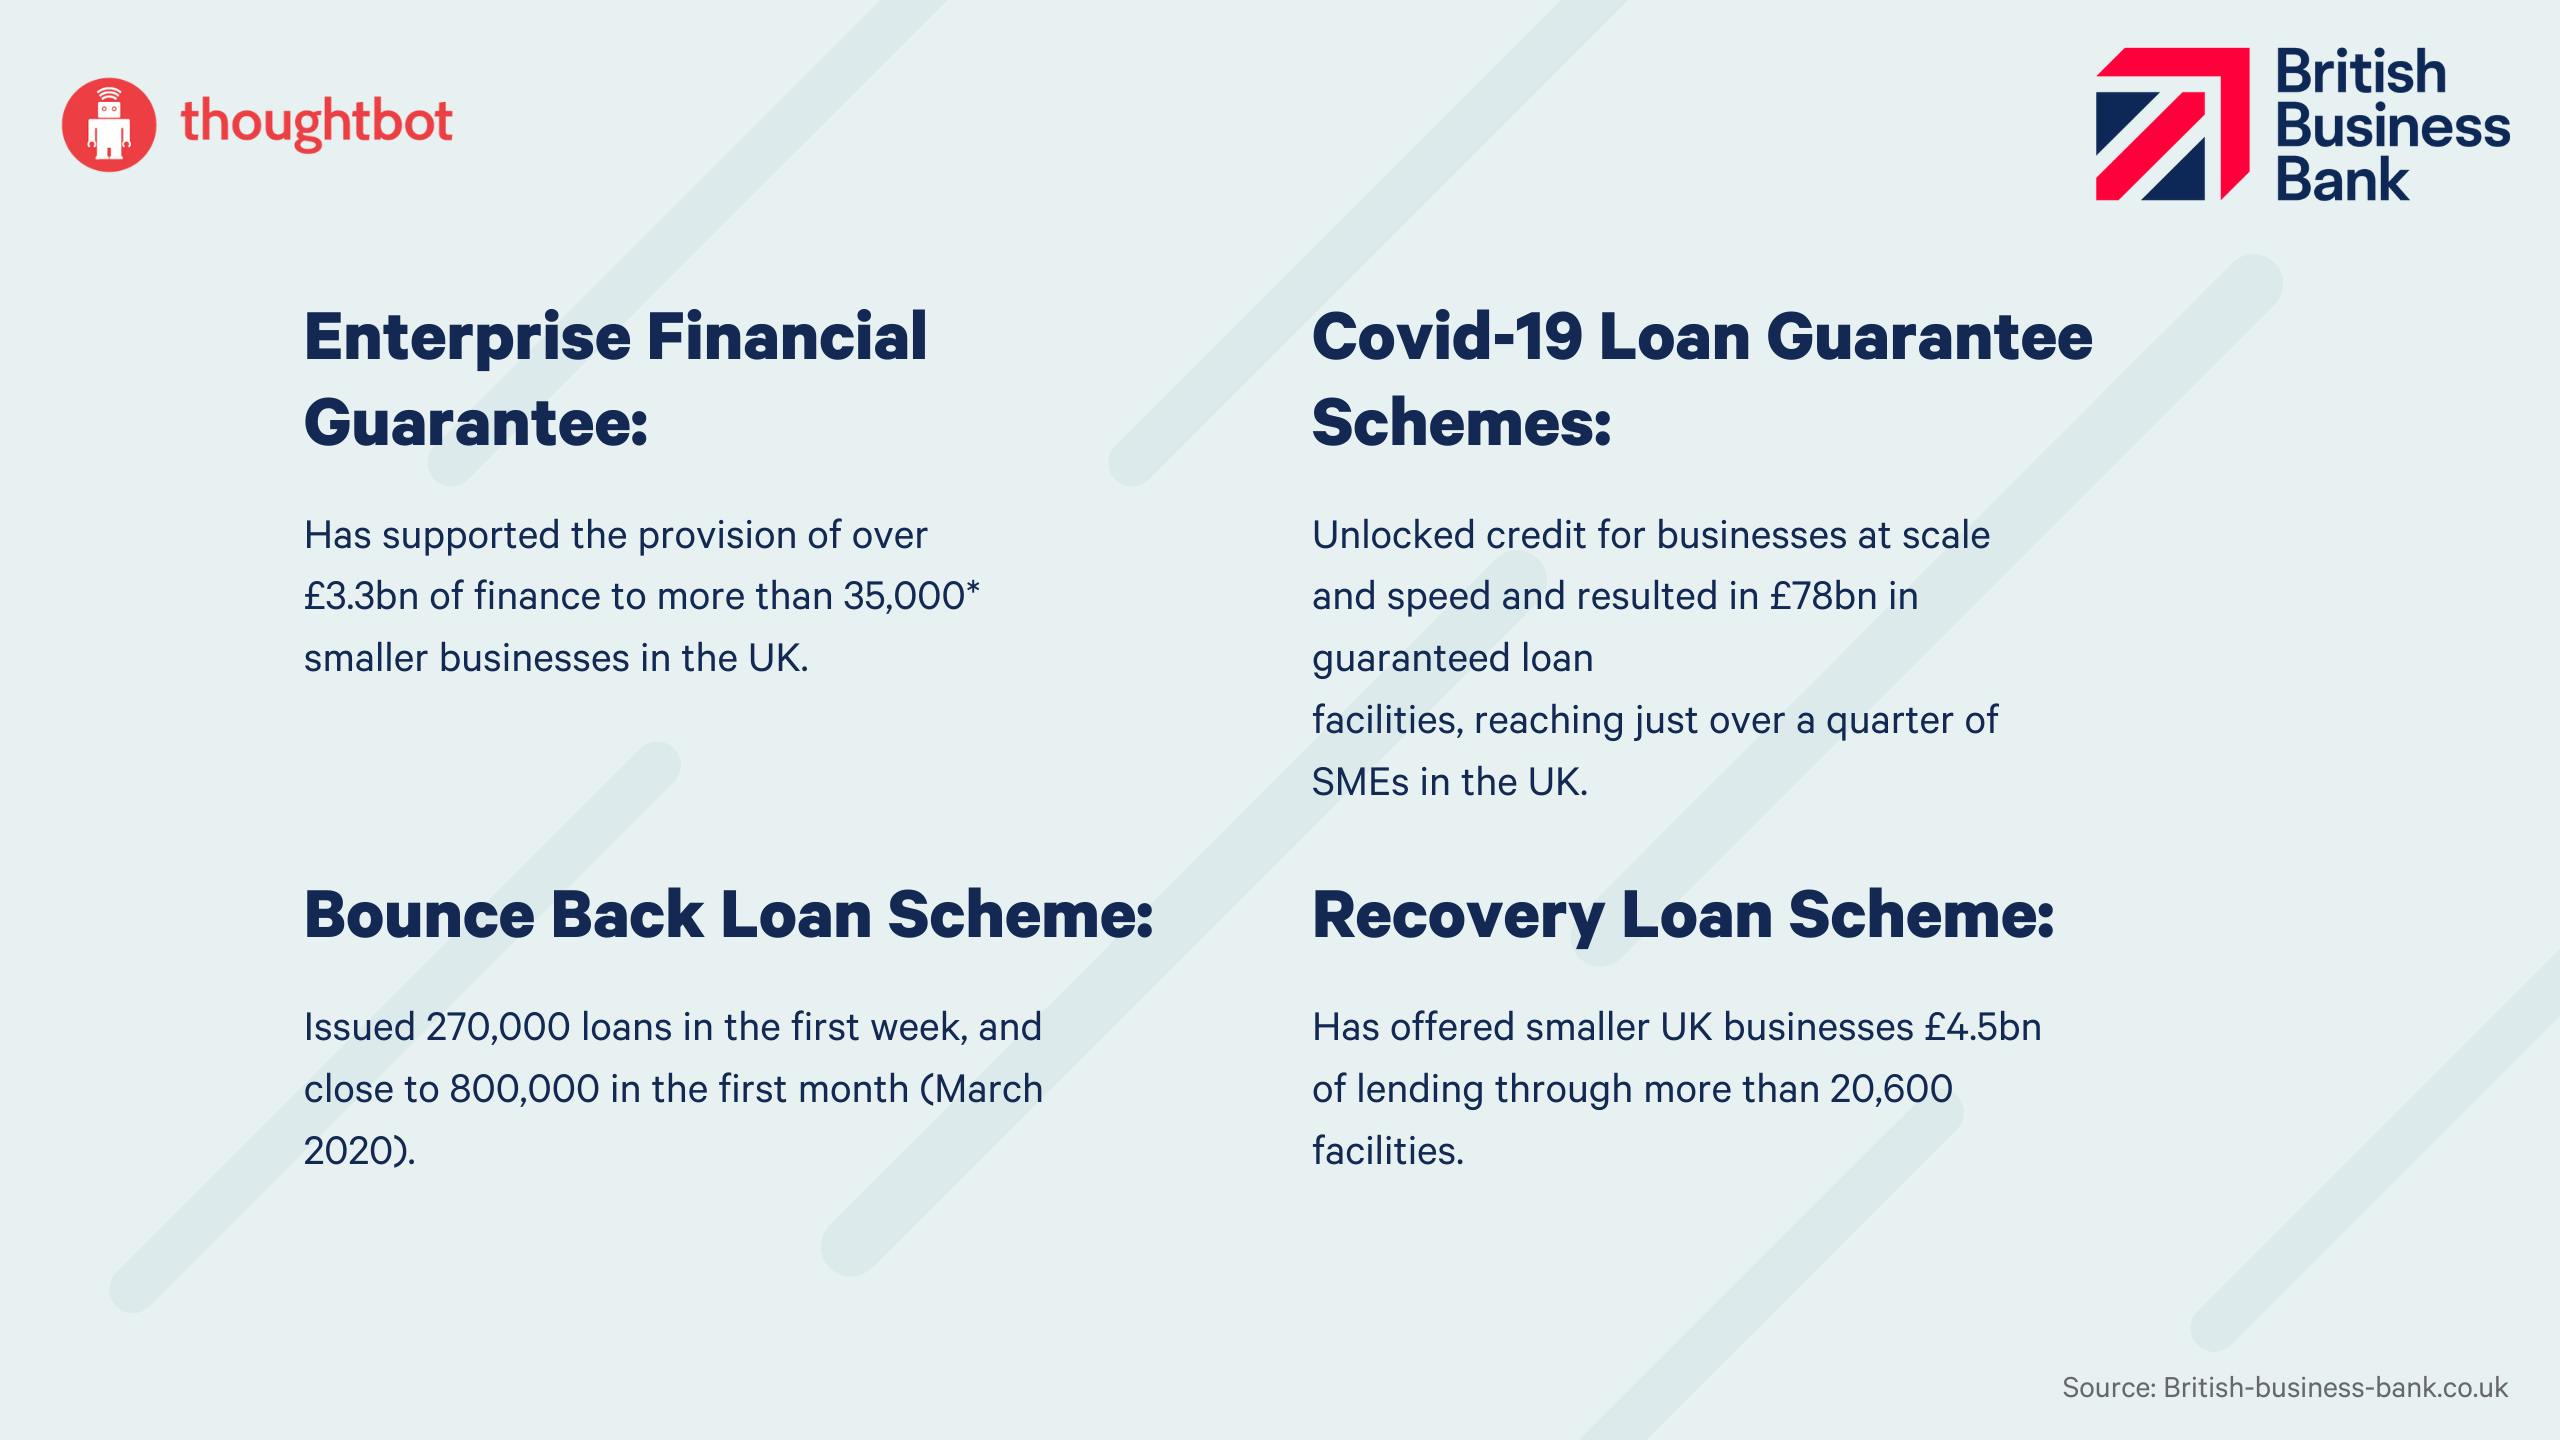 British Business Bank Covid-19 loan schemes. Enterprise Financial Guarantee: Has supported the provision of over £3.3bn of finance to more than 35,000* smaller businesses in the UK. Covid-19 Loan Guarantee Schemes: Unlocked credit for businesses at scale and speed and resulted in £78bn in guaranteed loan facilities, reaching just over a quarter of SMEs in the UK. Bounce Back Loan Scheme: Issued 270,000 loans in the first week, and close to 800,000 in the first month (March 2020). Recovery Loan Scheme: Has offered smaller UK businesses £4.5bn of lending through more than 20,600 facilities. 